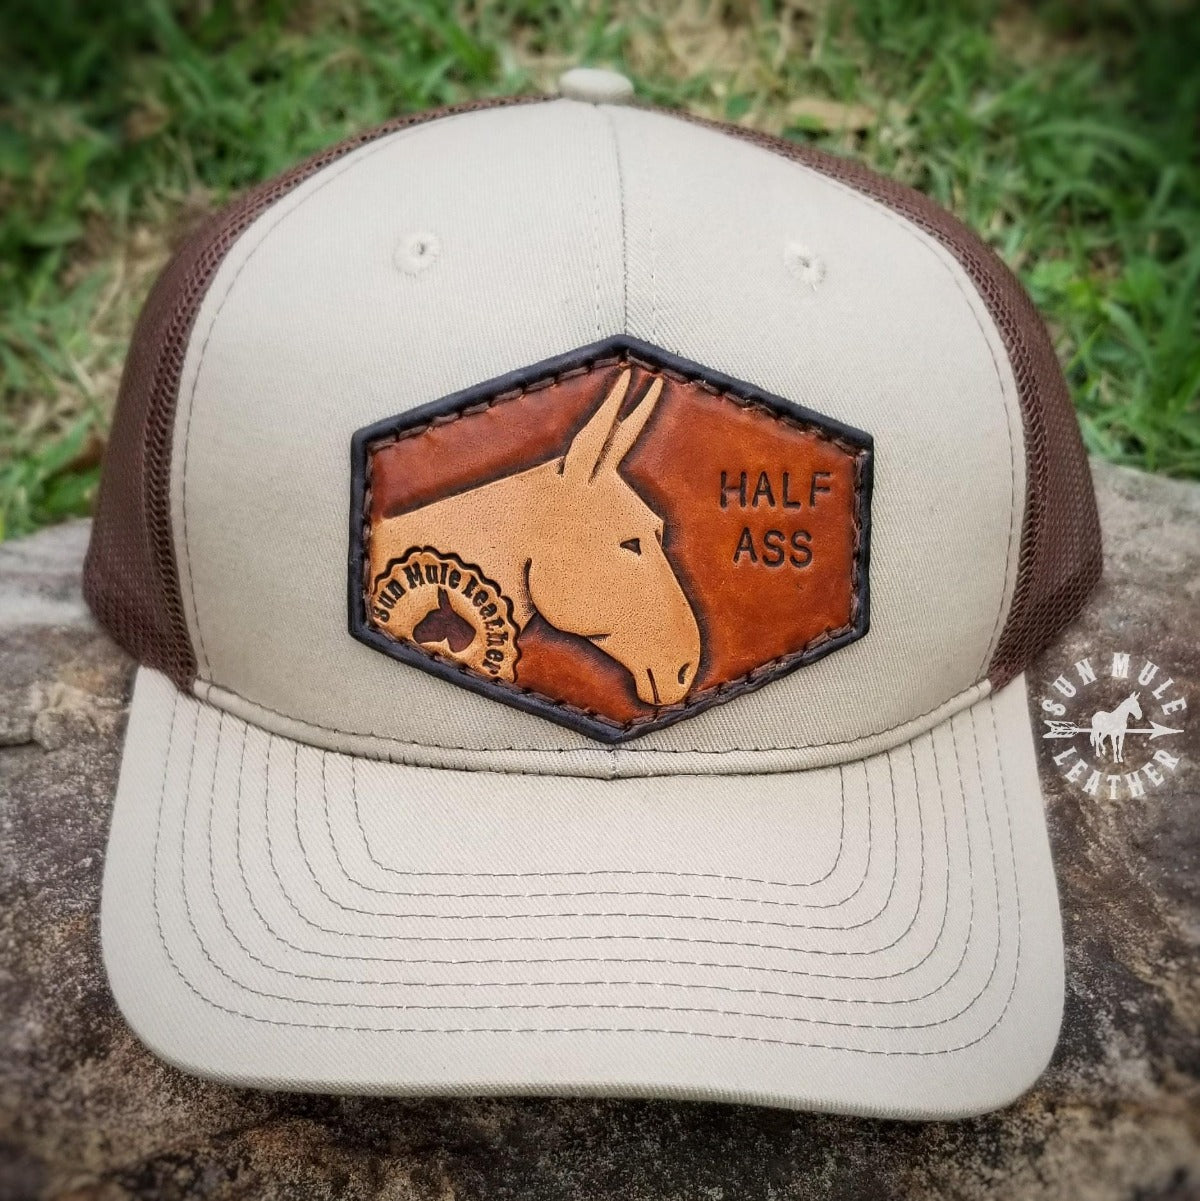 Half Ass mule hat, hand tooled mule on a leather patch. 